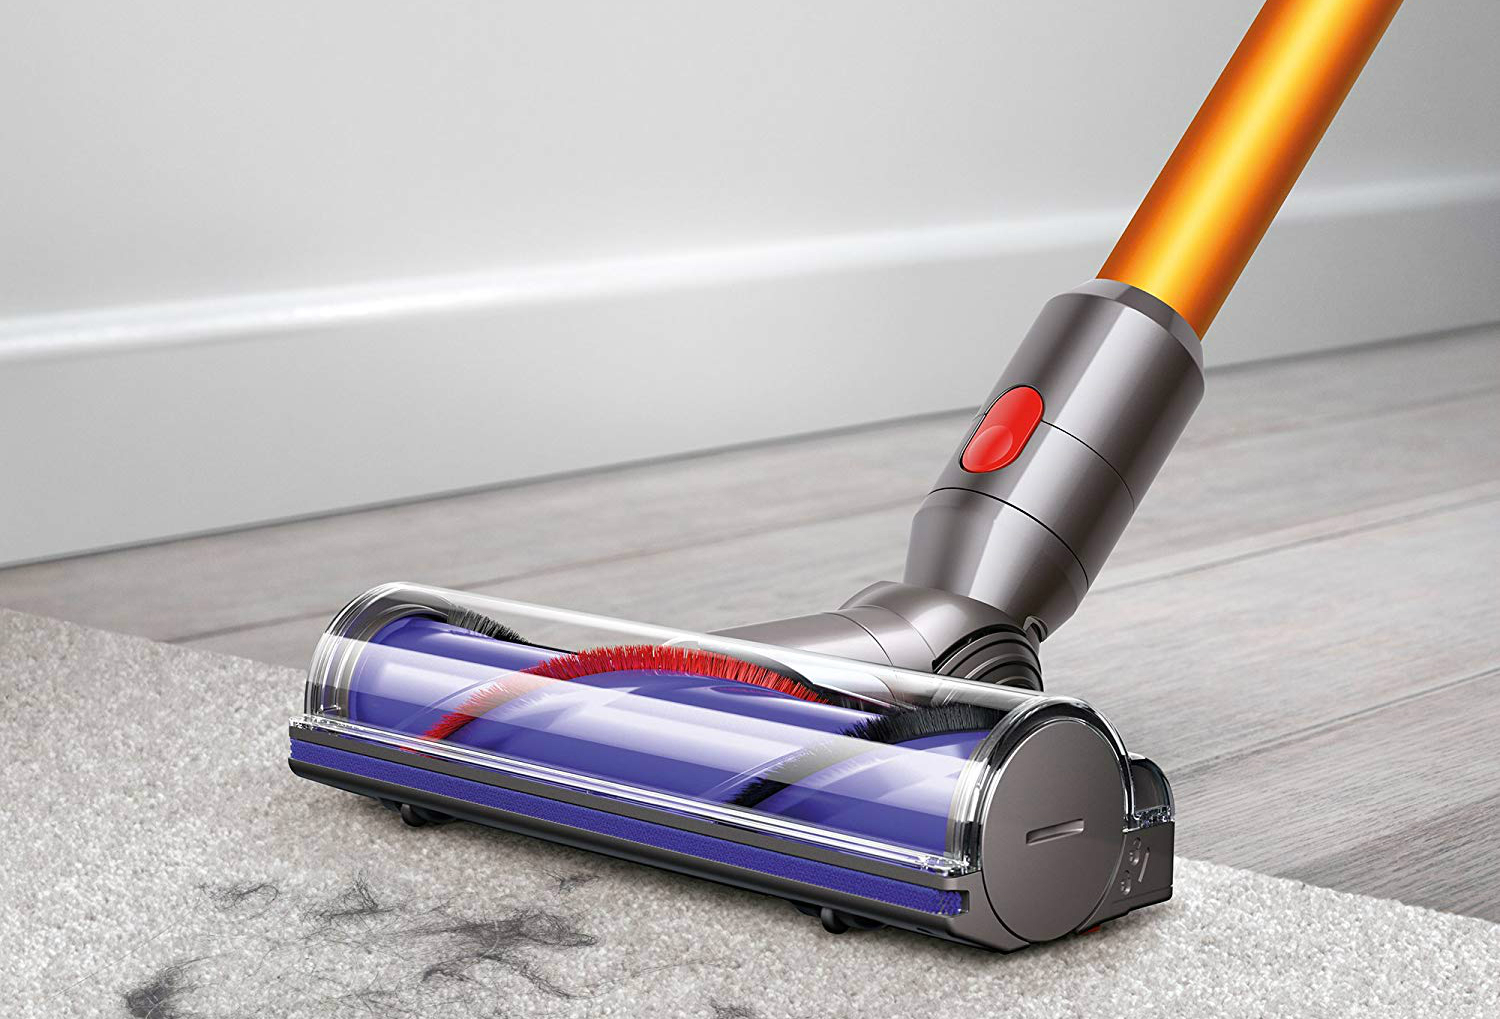 dyson vacuum cleaner deals on amazon v8 absolute cordless stick yellow 2